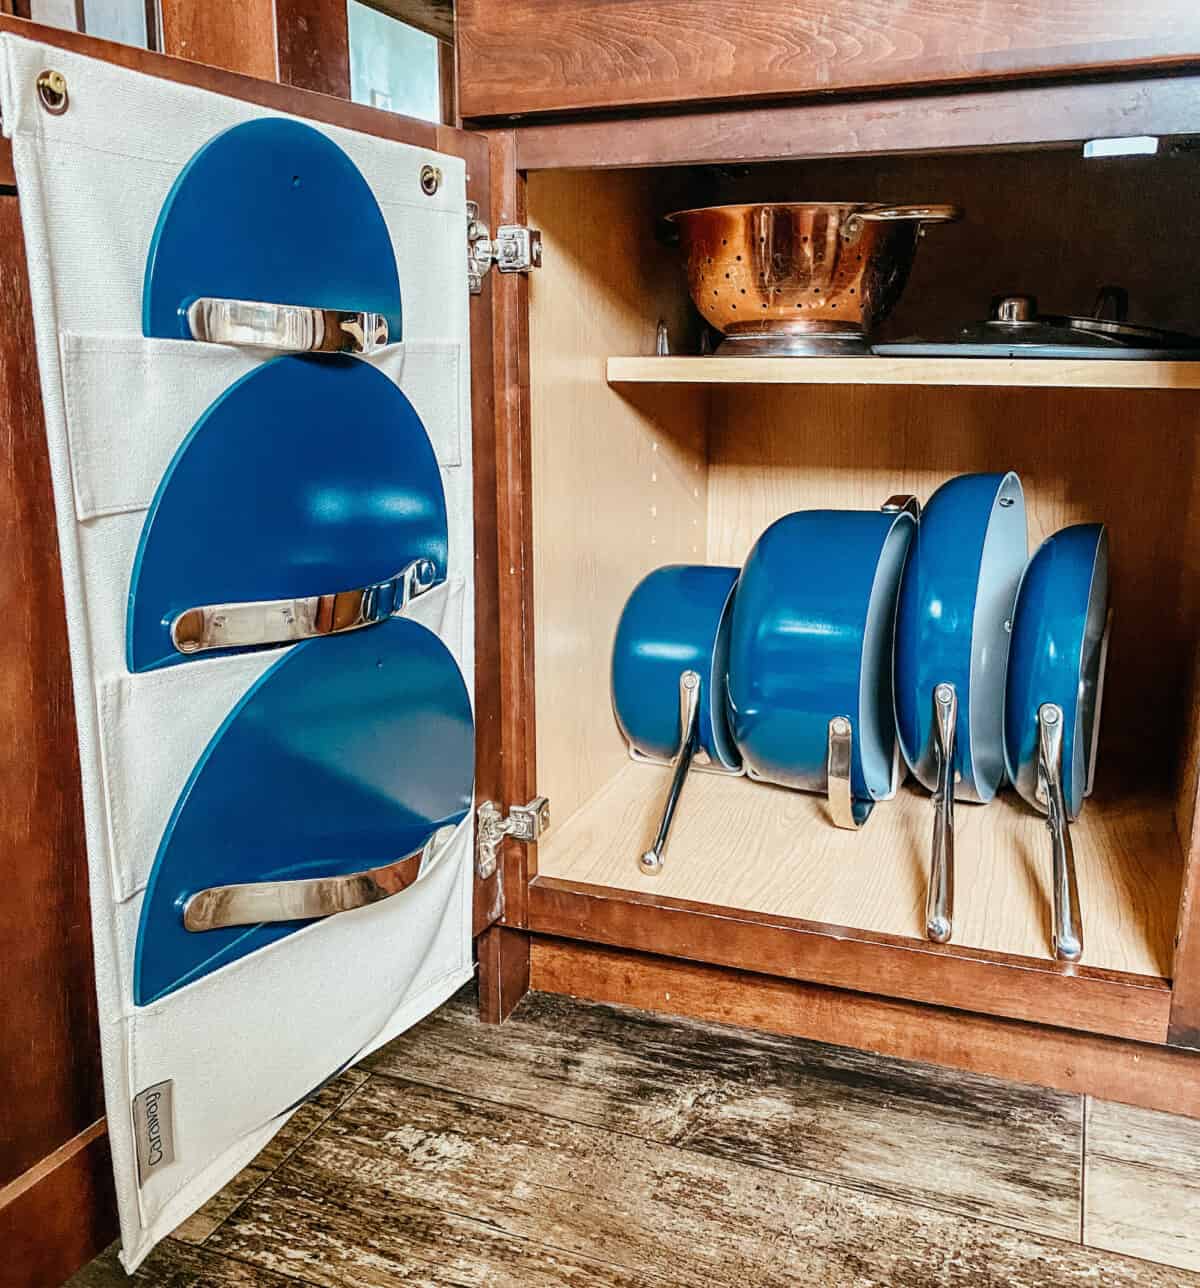 caraway cookware with storage pieces in a cabinet.